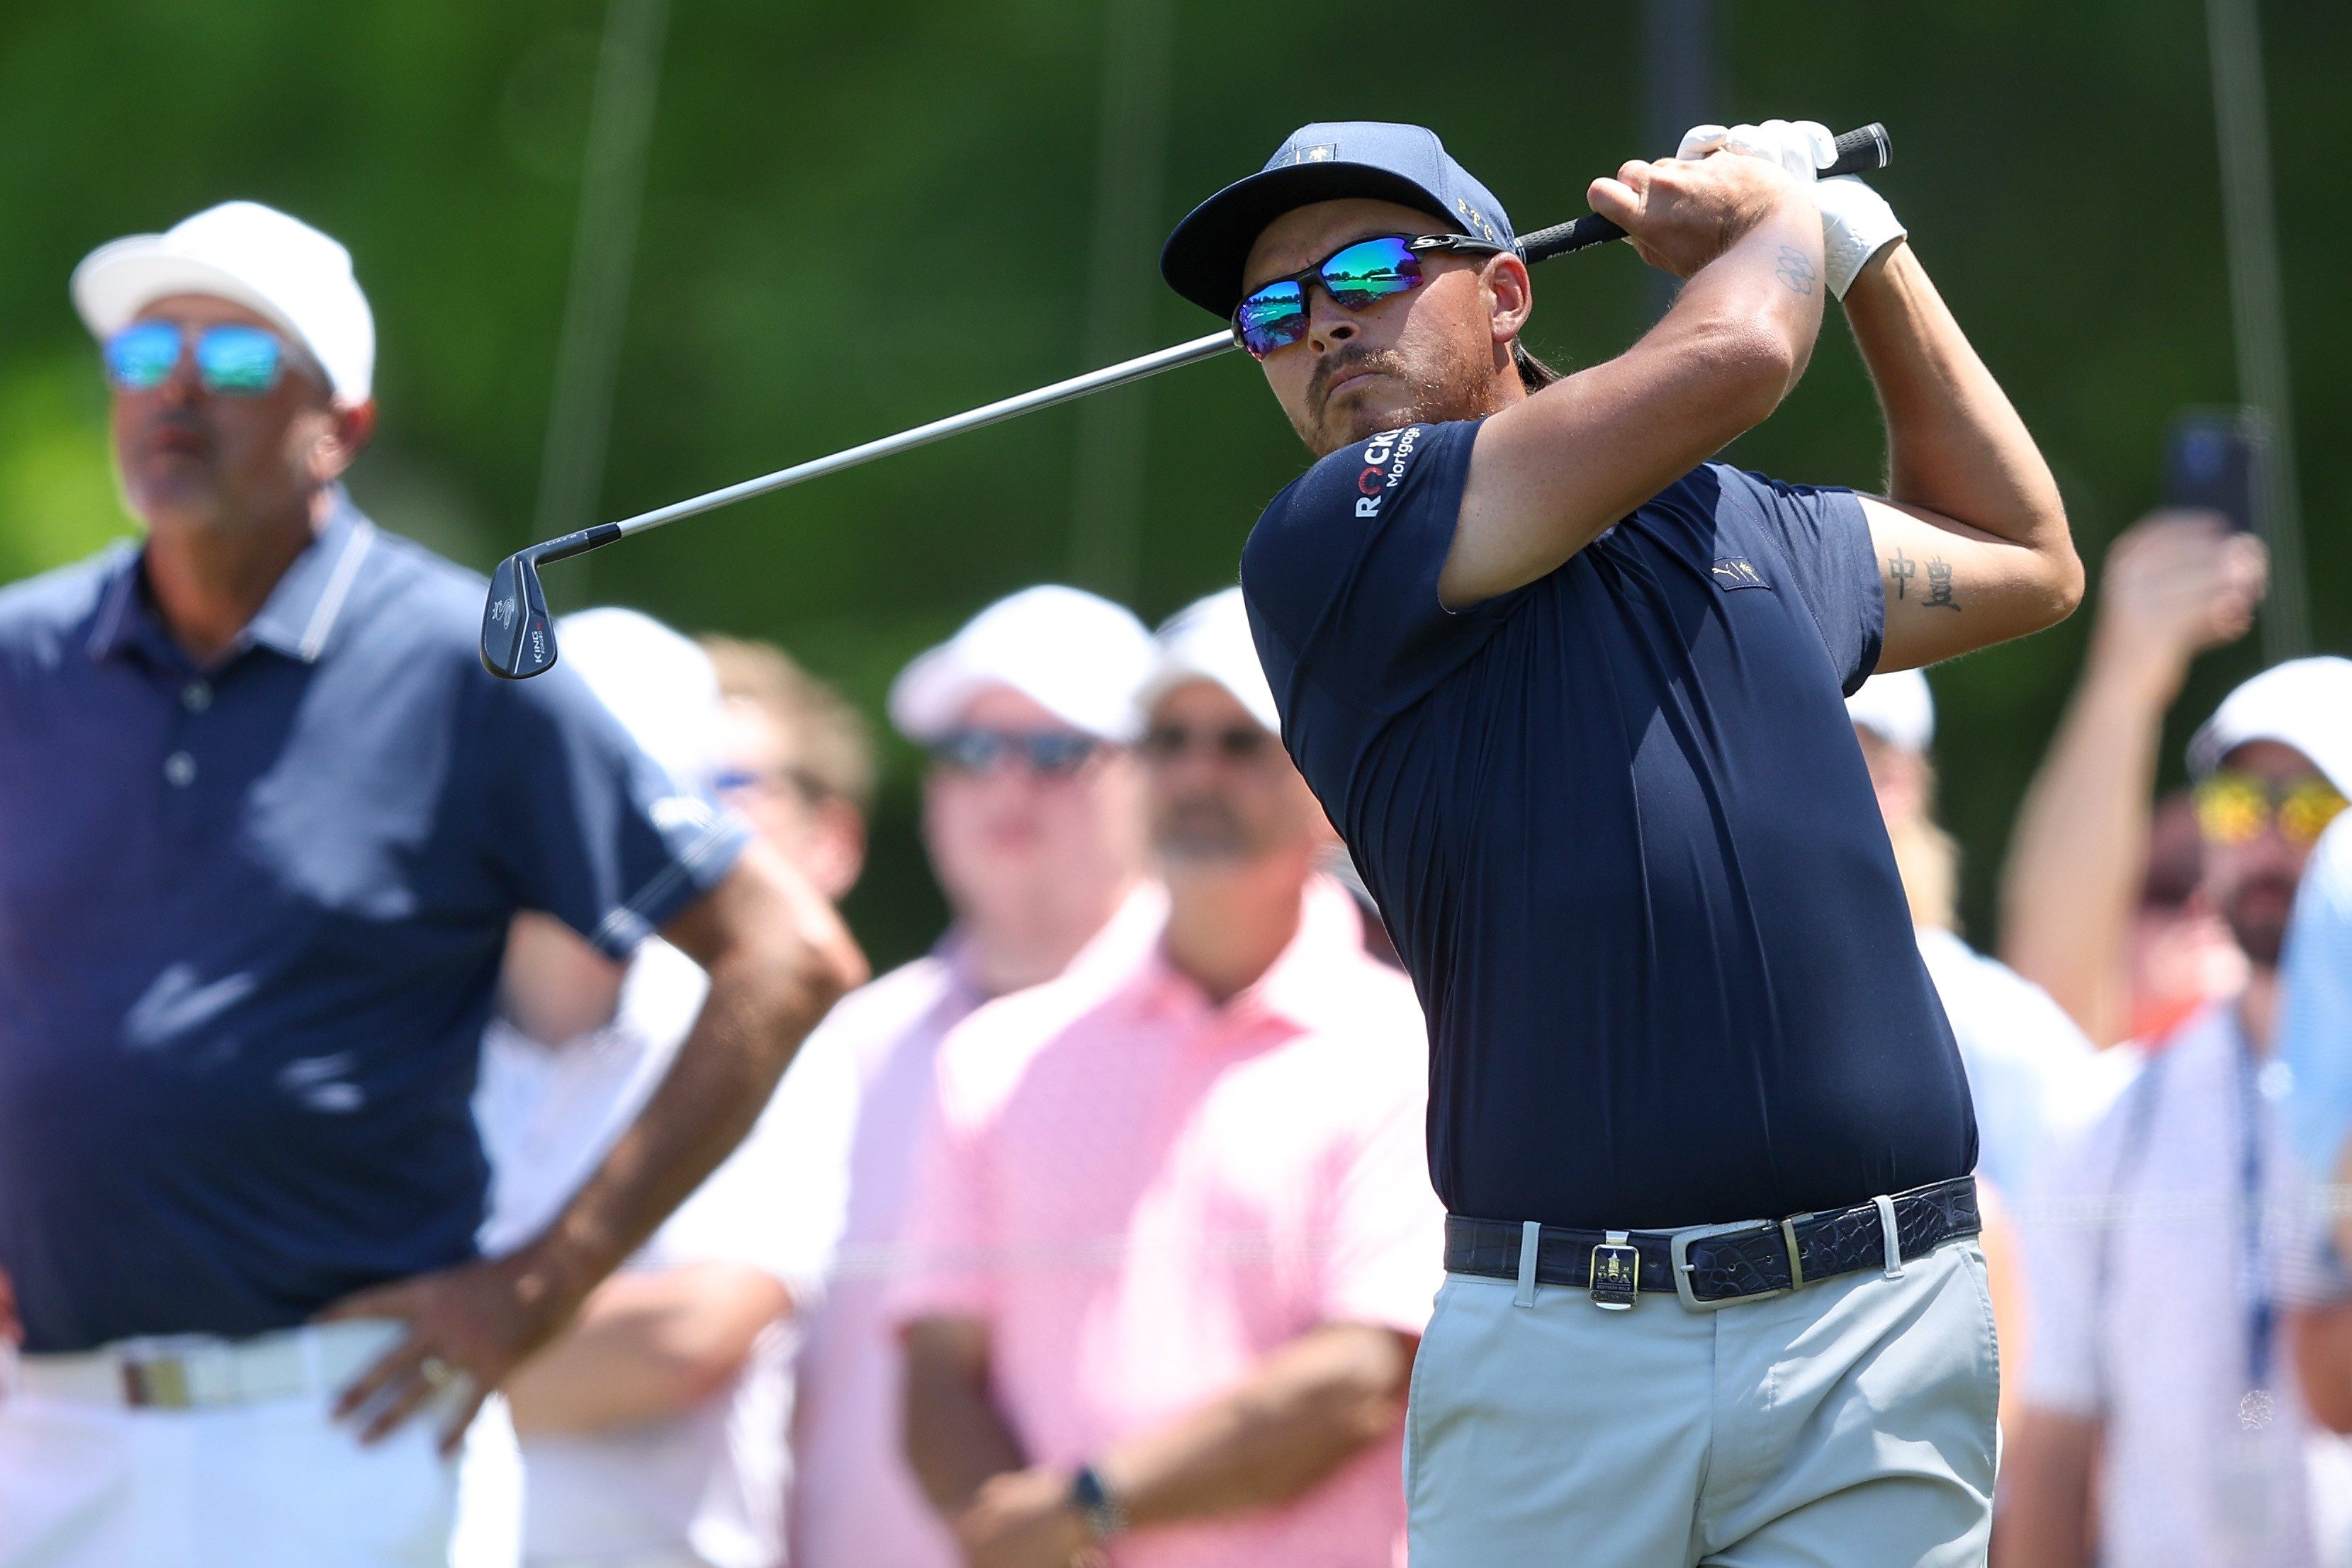 Rickie Fowler said he was undecided about whether to play in any LIV Golf events. Photo: AFP